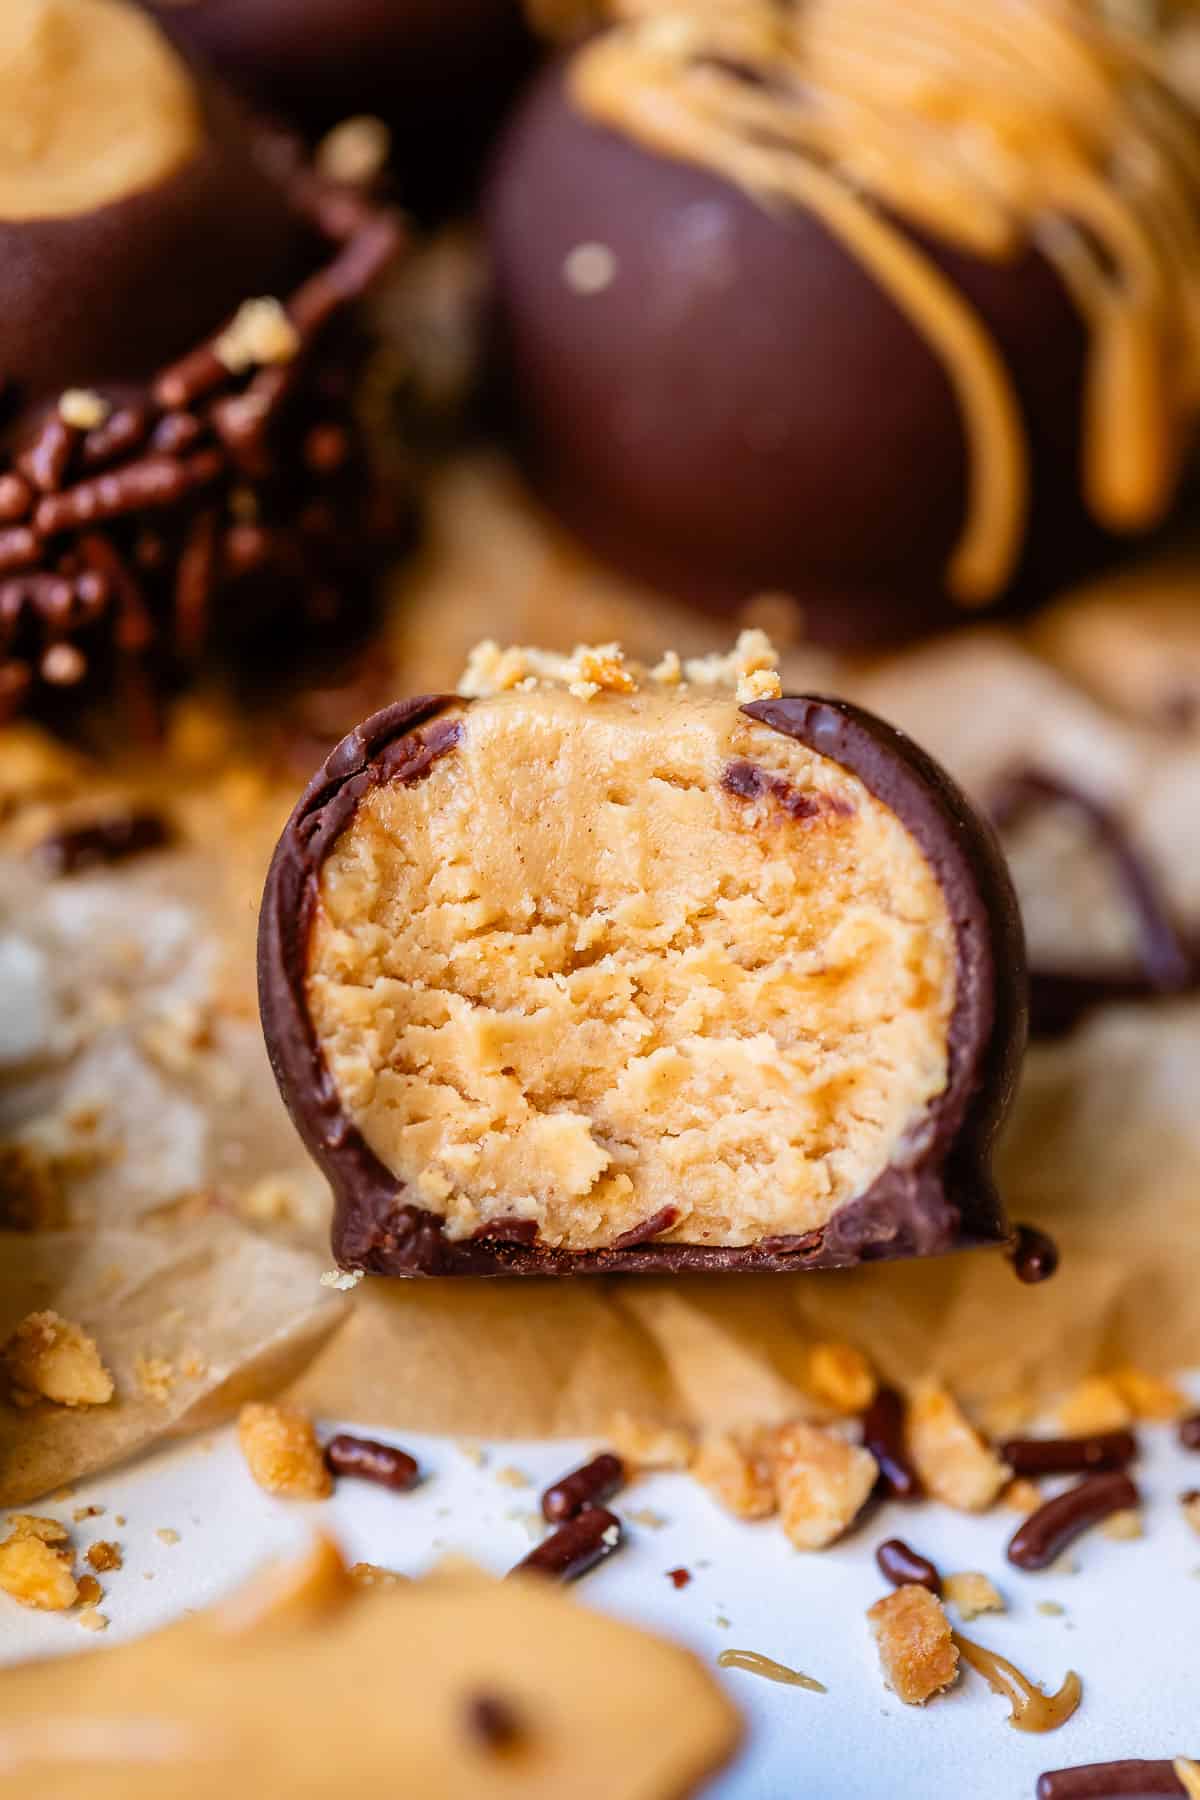 Close up of peanut butter buckeye candy with bite taken out revealing the delicious center.